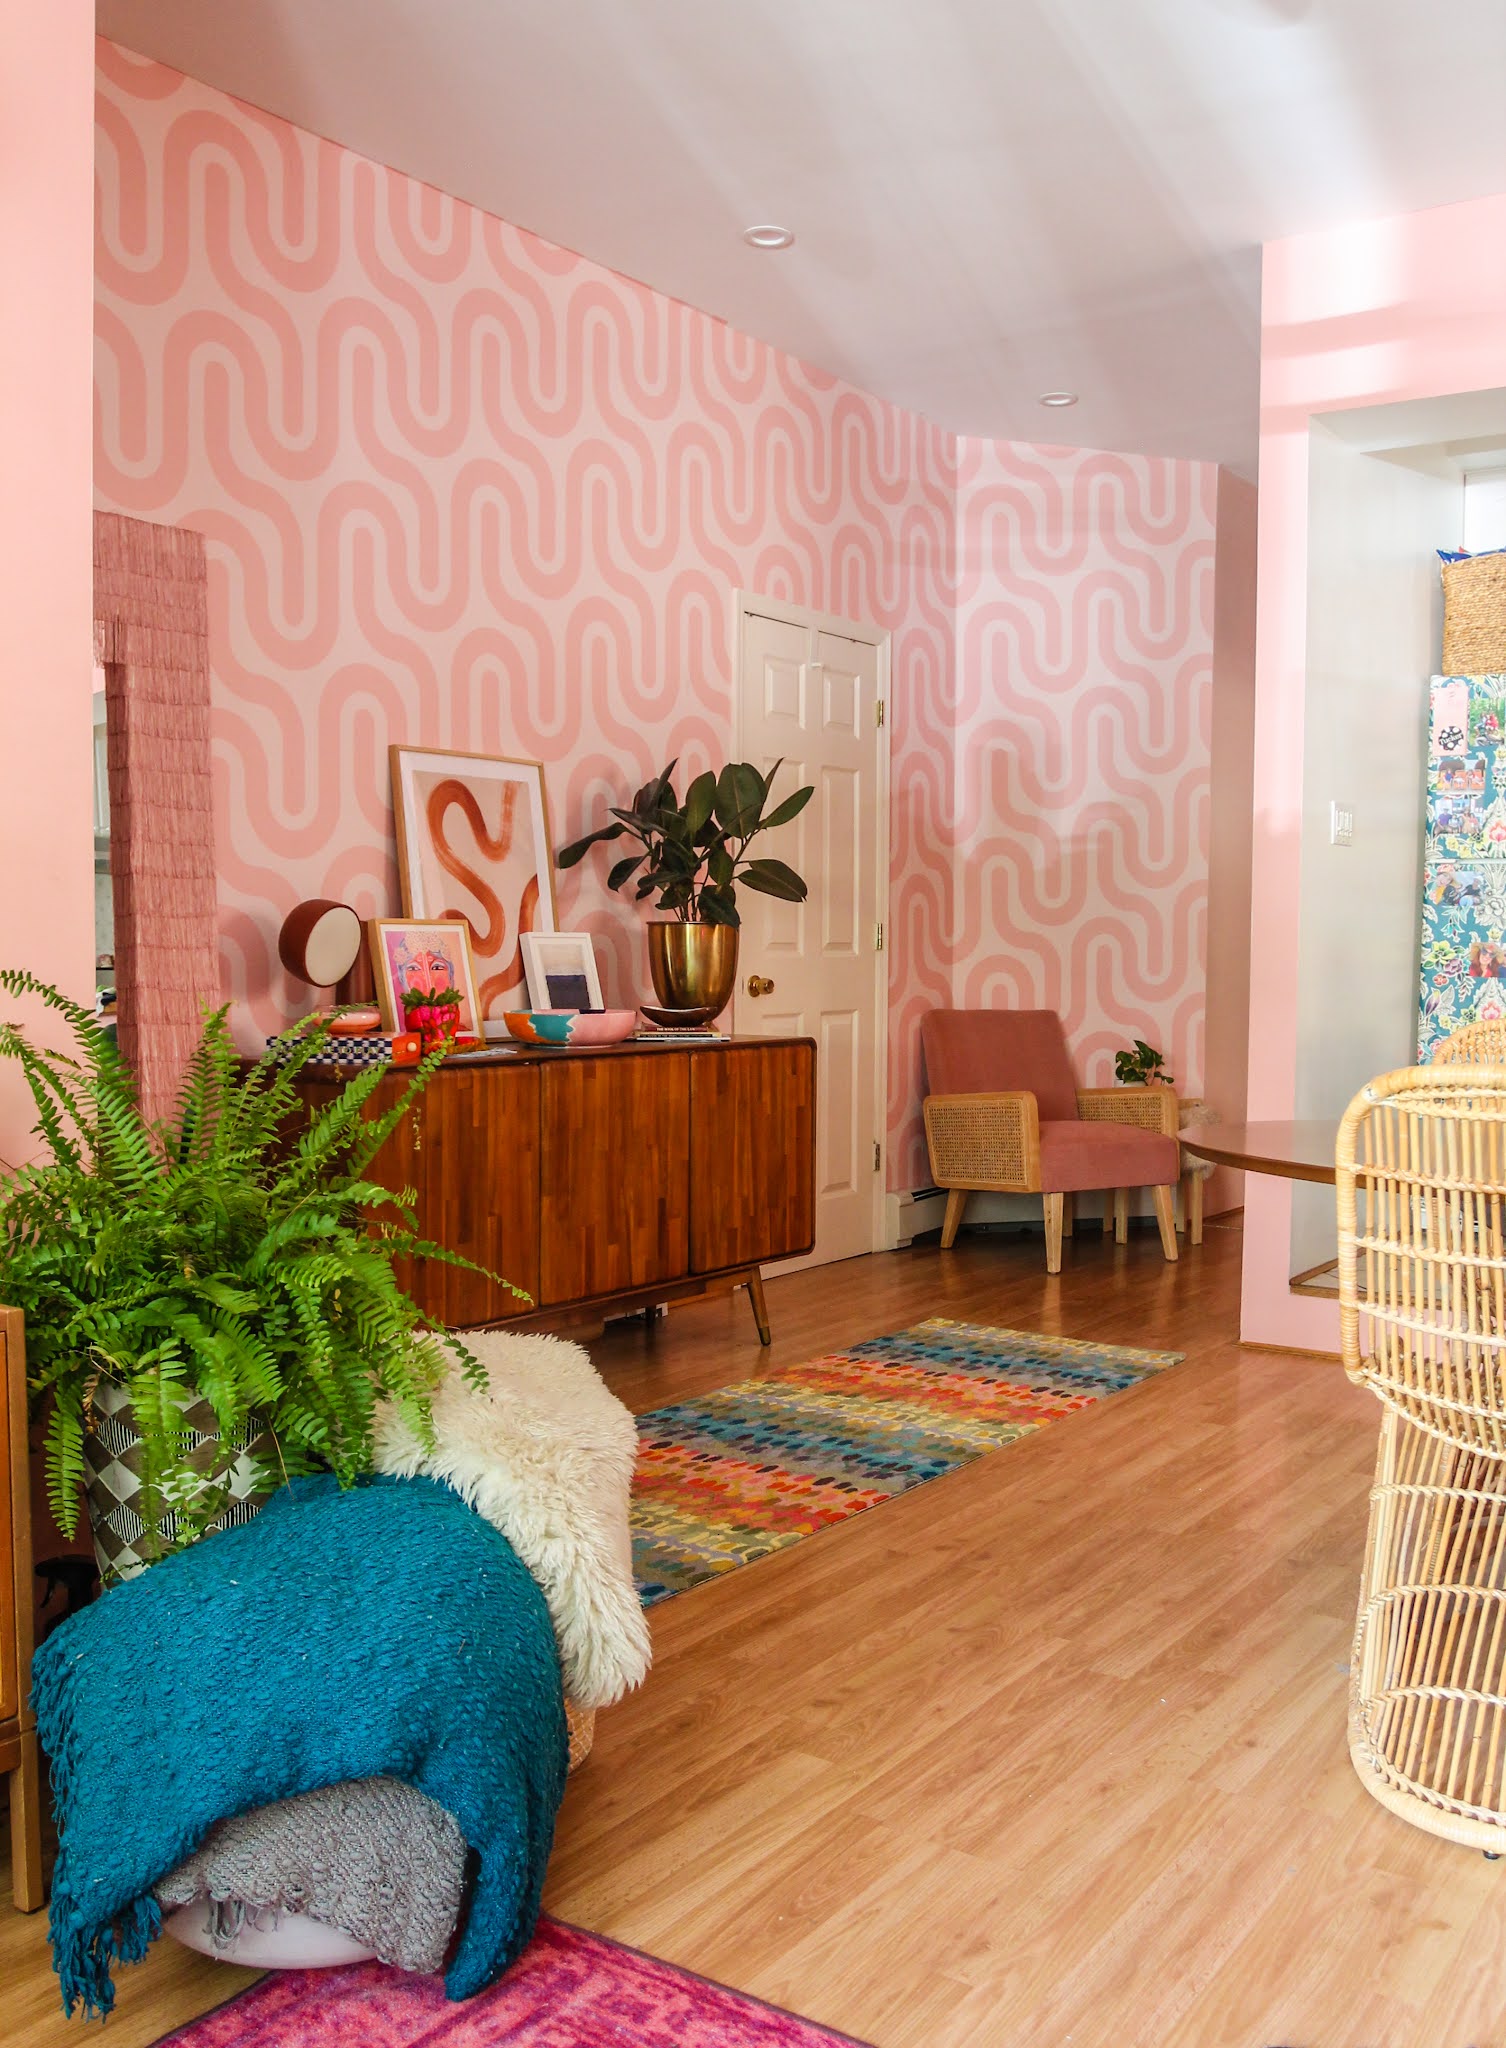 wallpaper ideas // colorful homes // maximalist home decor // pink home decor // retro home decor // retro wallpaper ideas // entryway decor // entryway ideas // small space decor ideas // maximalist homes